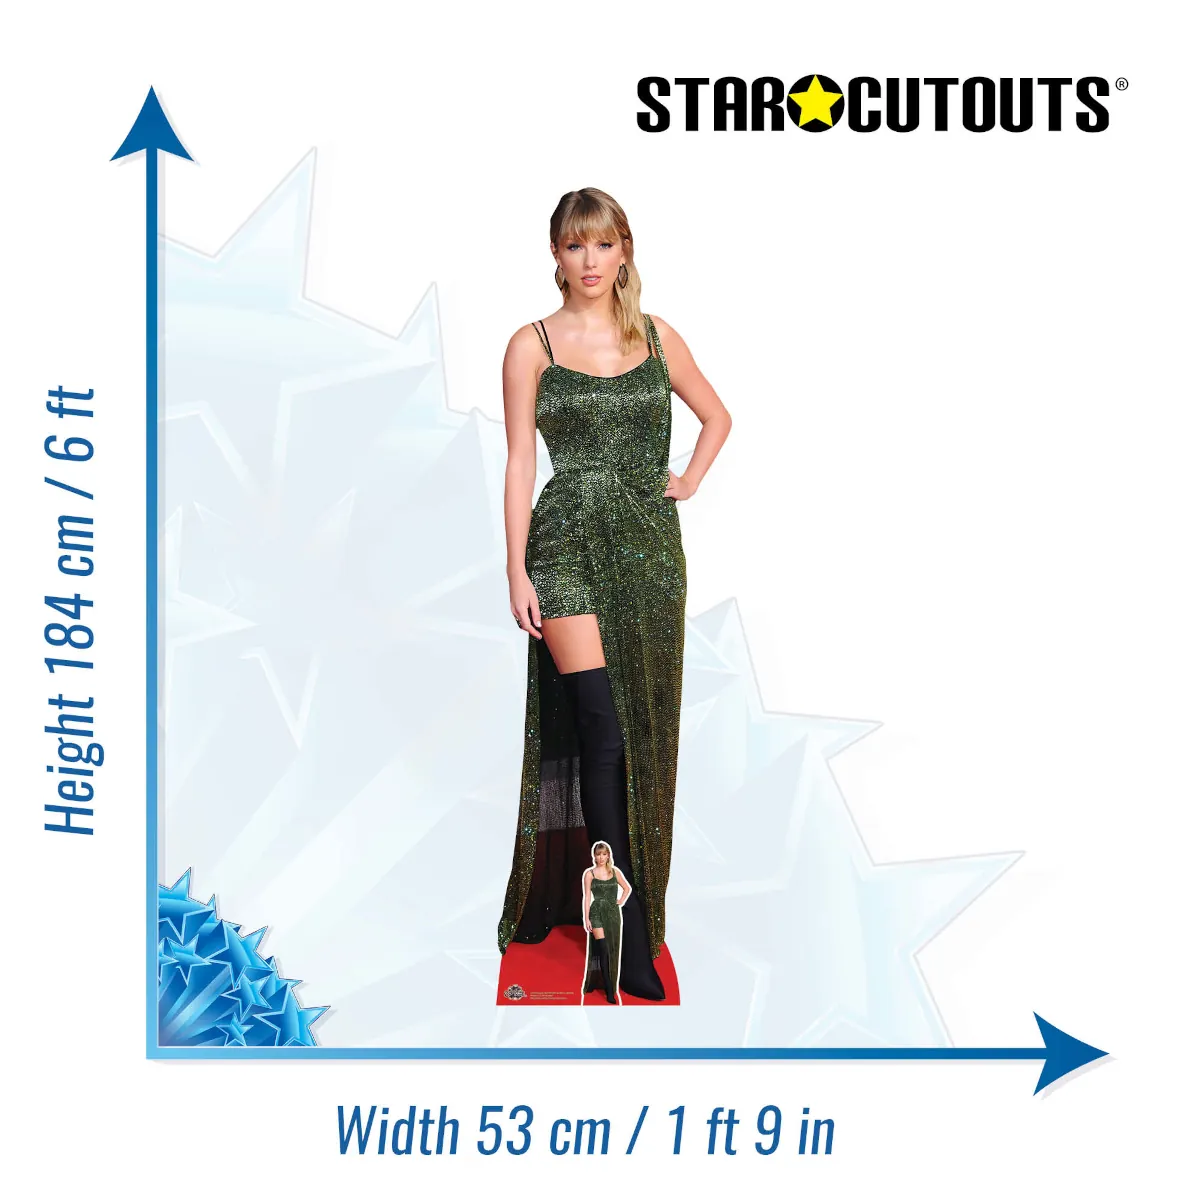 Beloved UK Taylor Swift cardboard cutout auctioned for charity in memory of  slain transgender teen – 97.9 WRMF